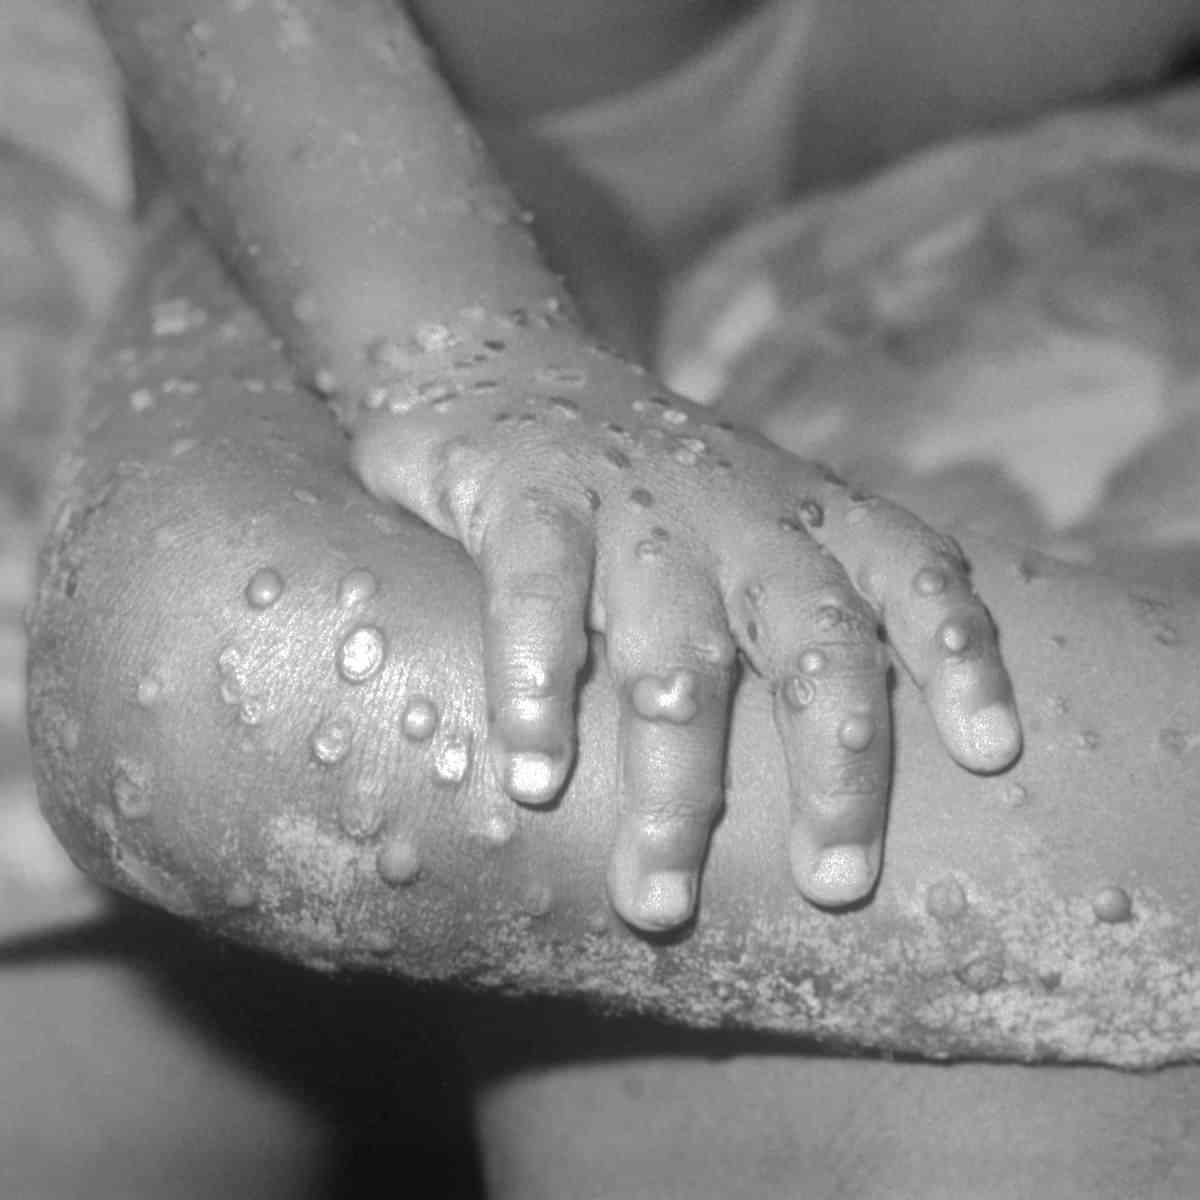 Health Ministry issues guidelines for Monkeypox management